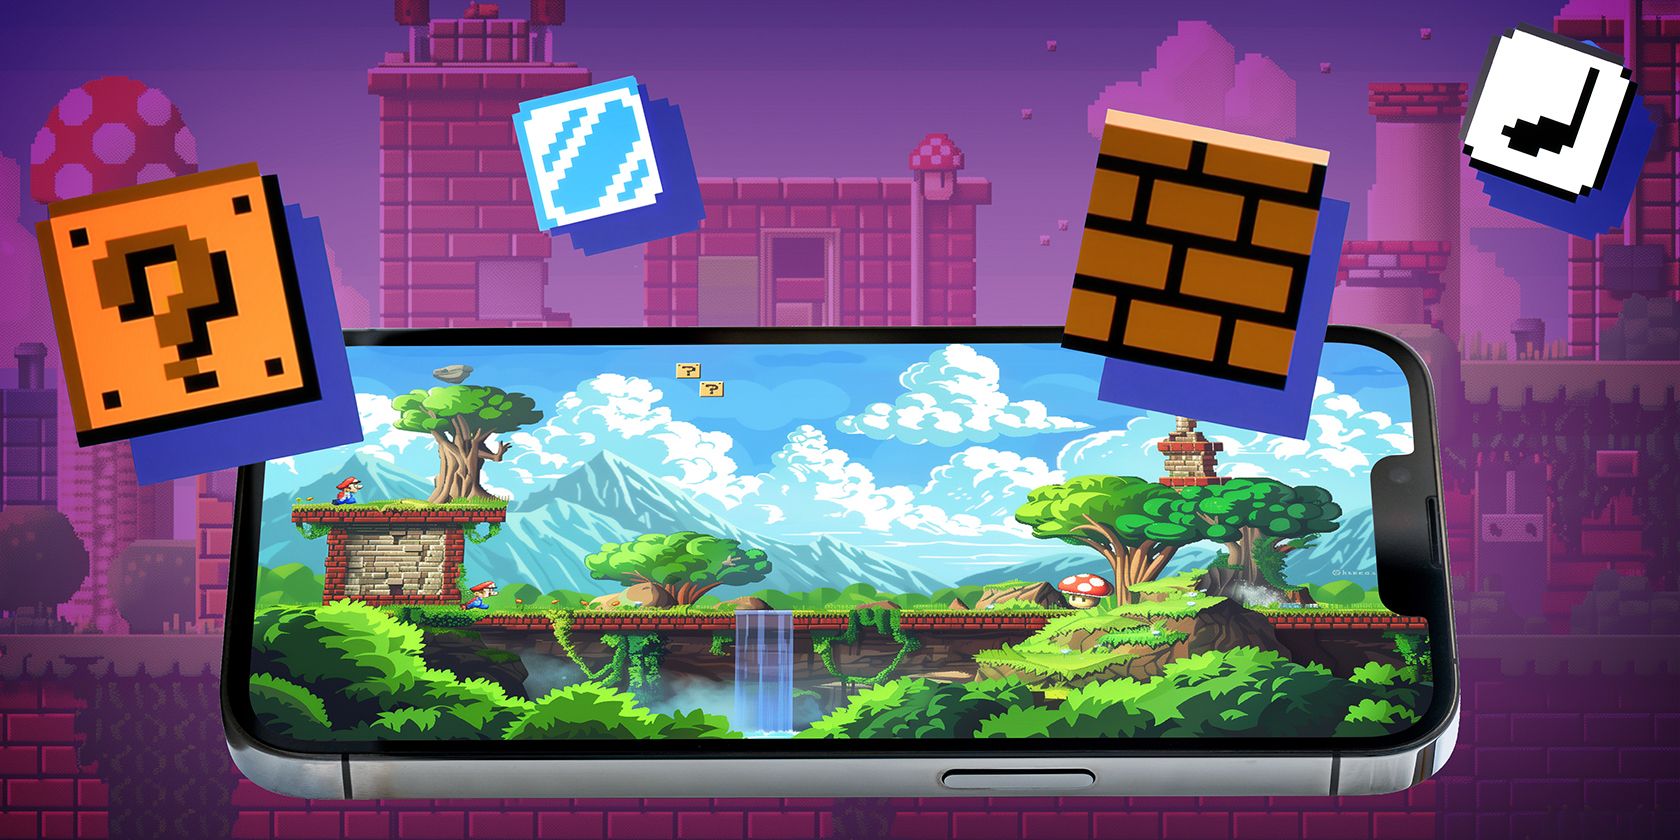 An iphone displaying a classic platform game landscape with pixelated game icons floating around it against a backdrop of pixel art scenery.